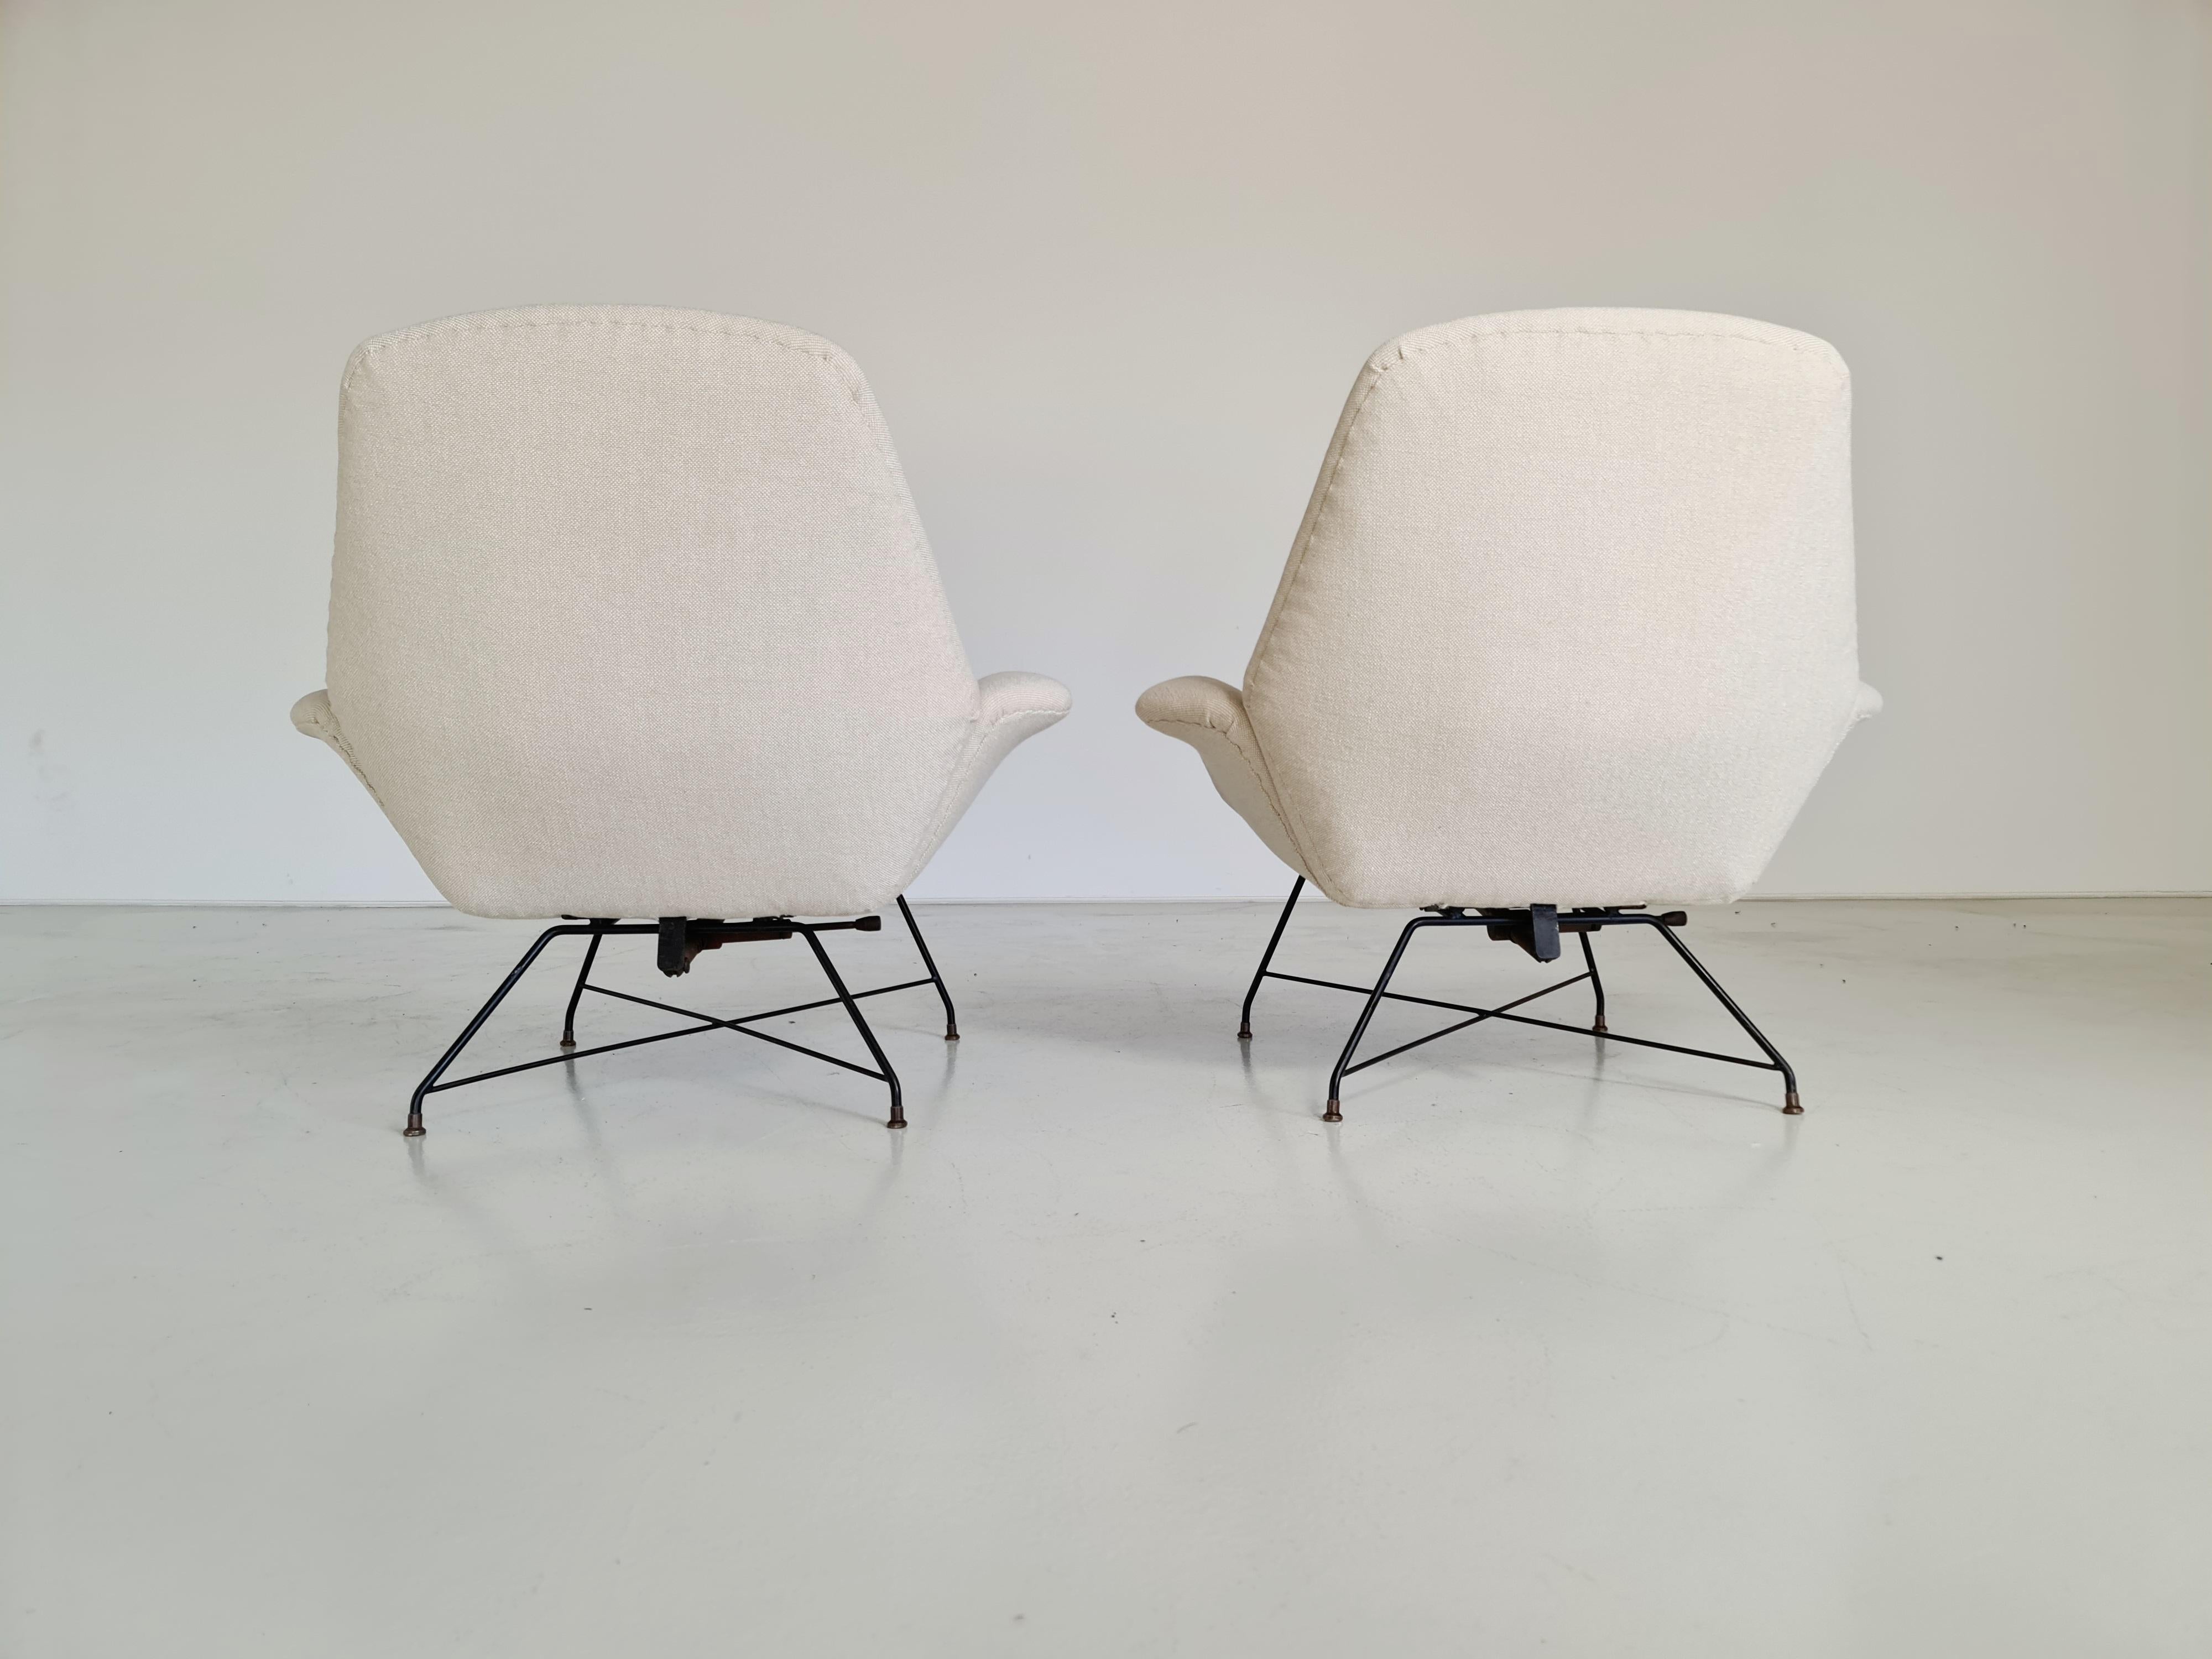 Italian ‘Lotus’ Lounge Chairs in cream wool fabric by Augusto Bozzi for Saporiti, 1960s For Sale